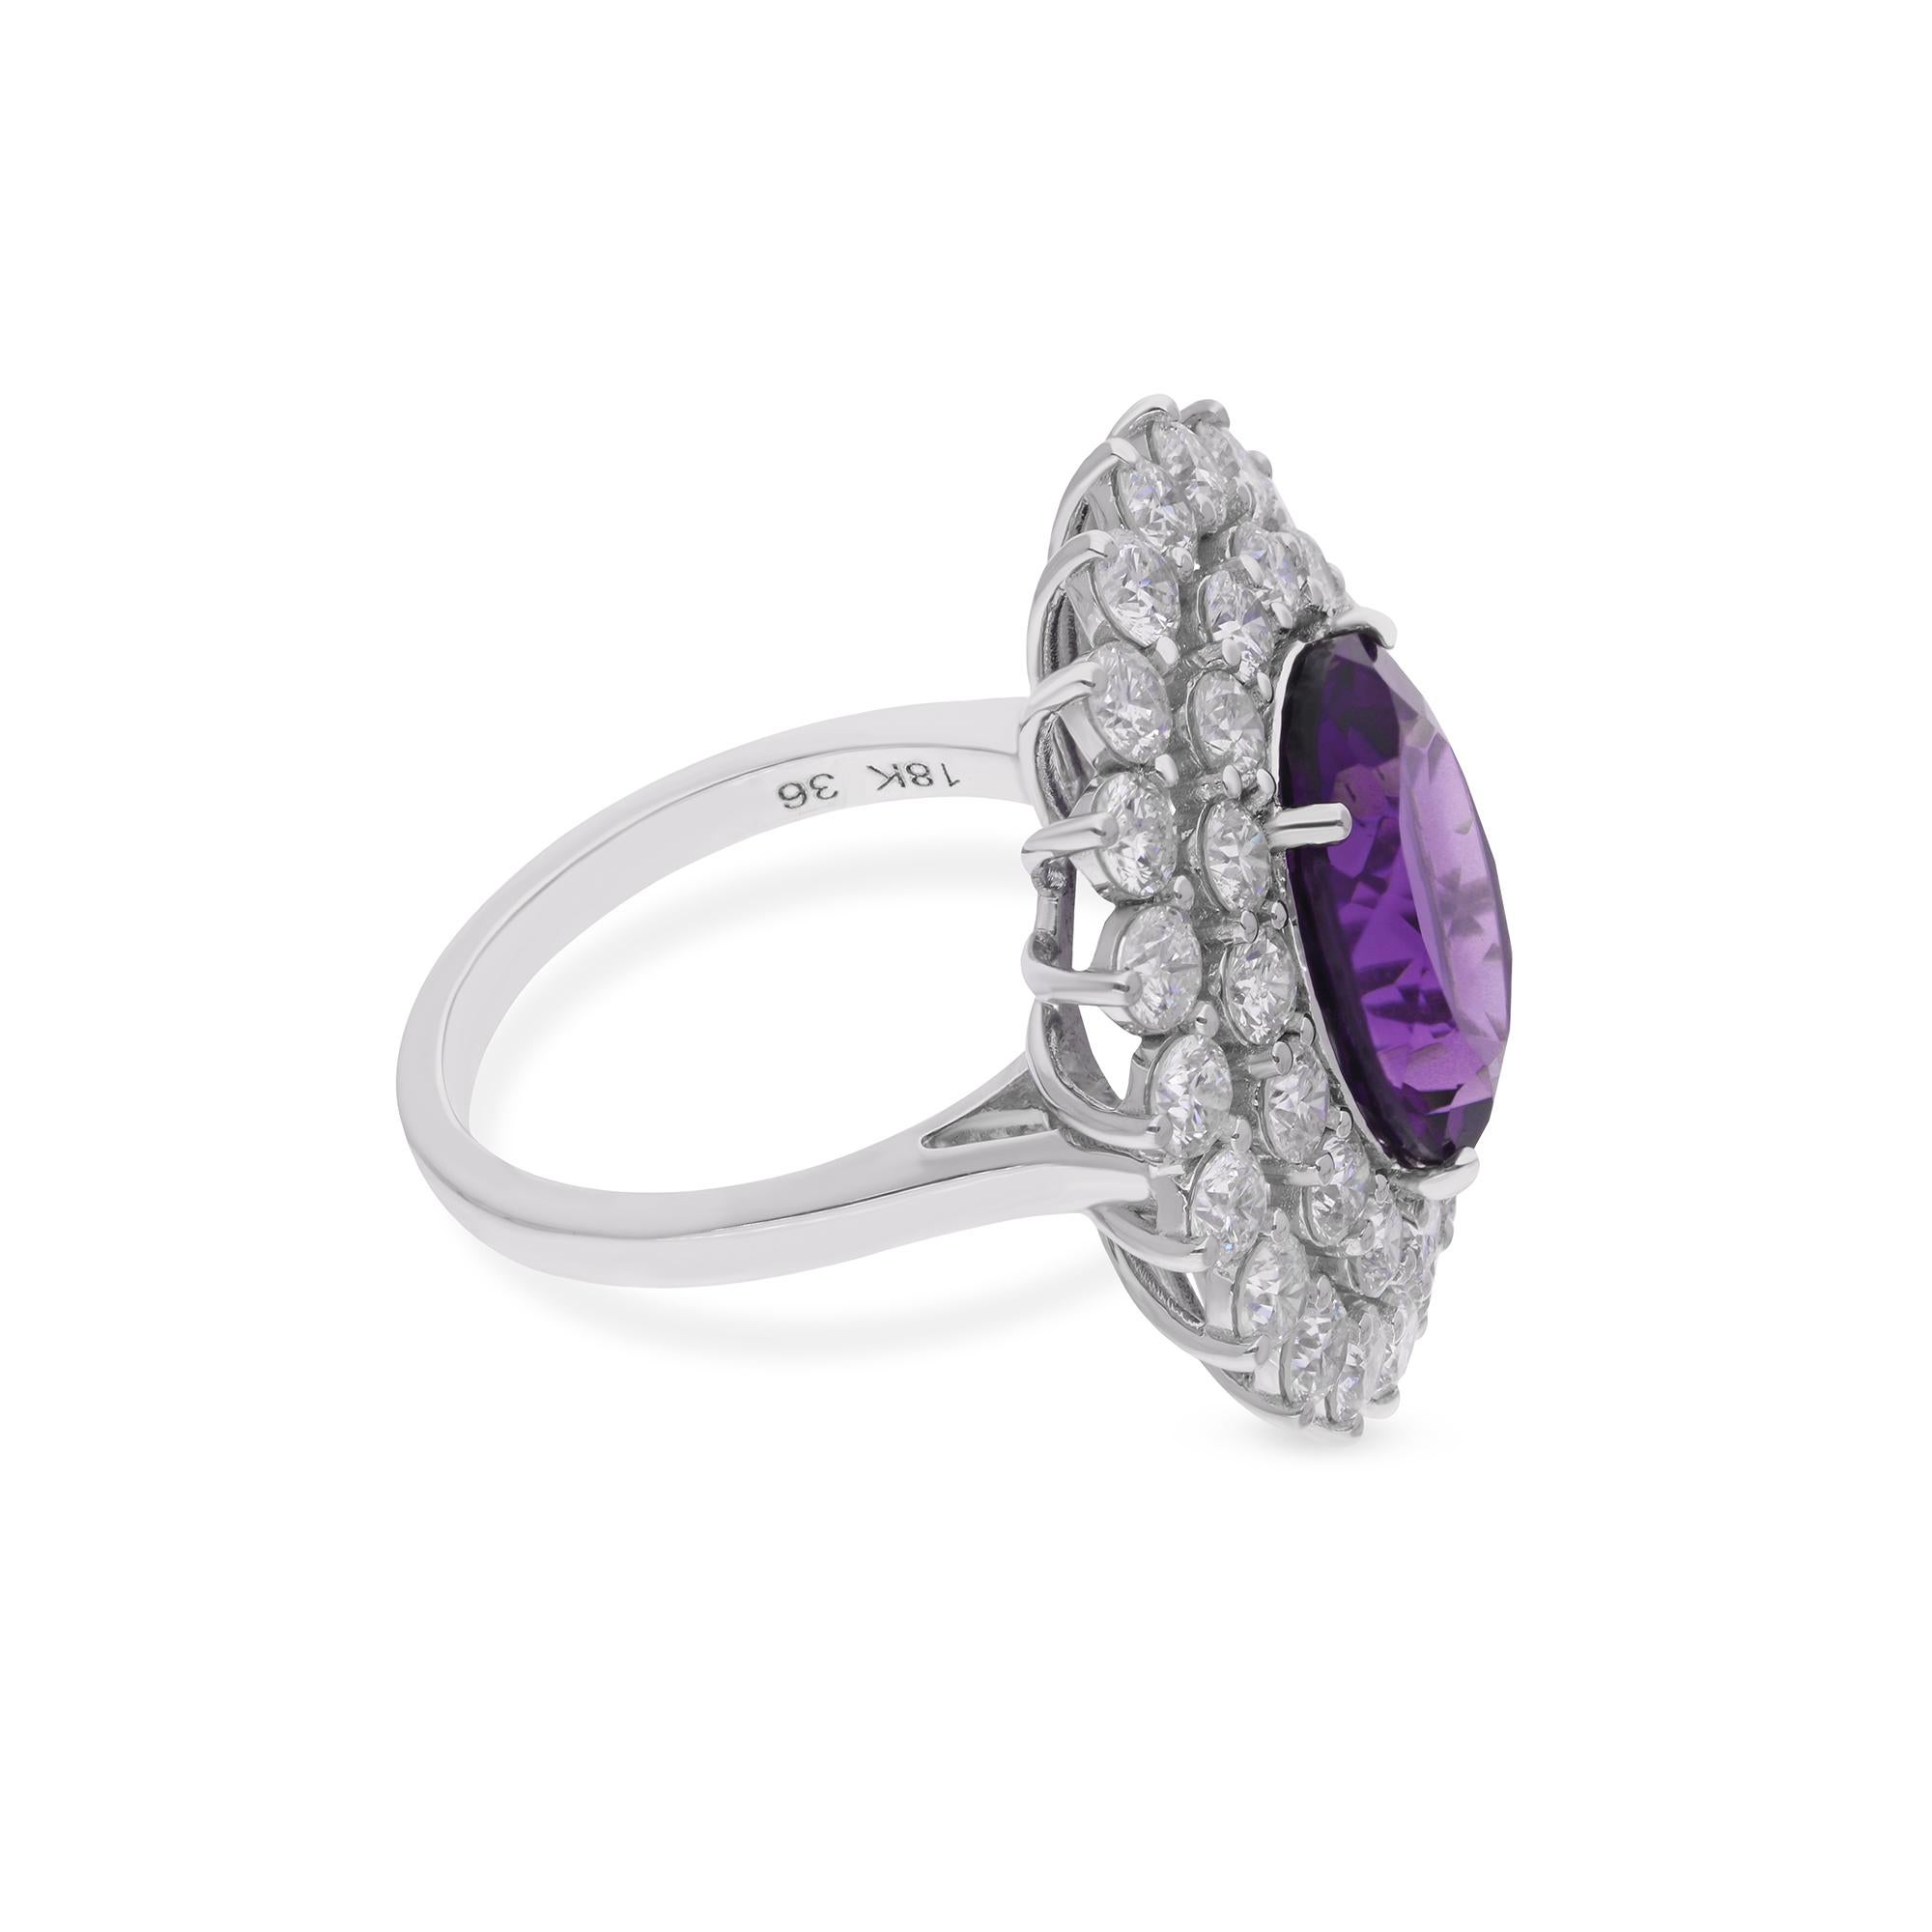 At the center of the ring rests a captivating amethyst gemstone, renowned for its mesmerizing purple hues and captivating brilliance. Surrounding the amethyst are dazzling round-cut diamonds, delicately hand-set in a luminous 14 karat white gold